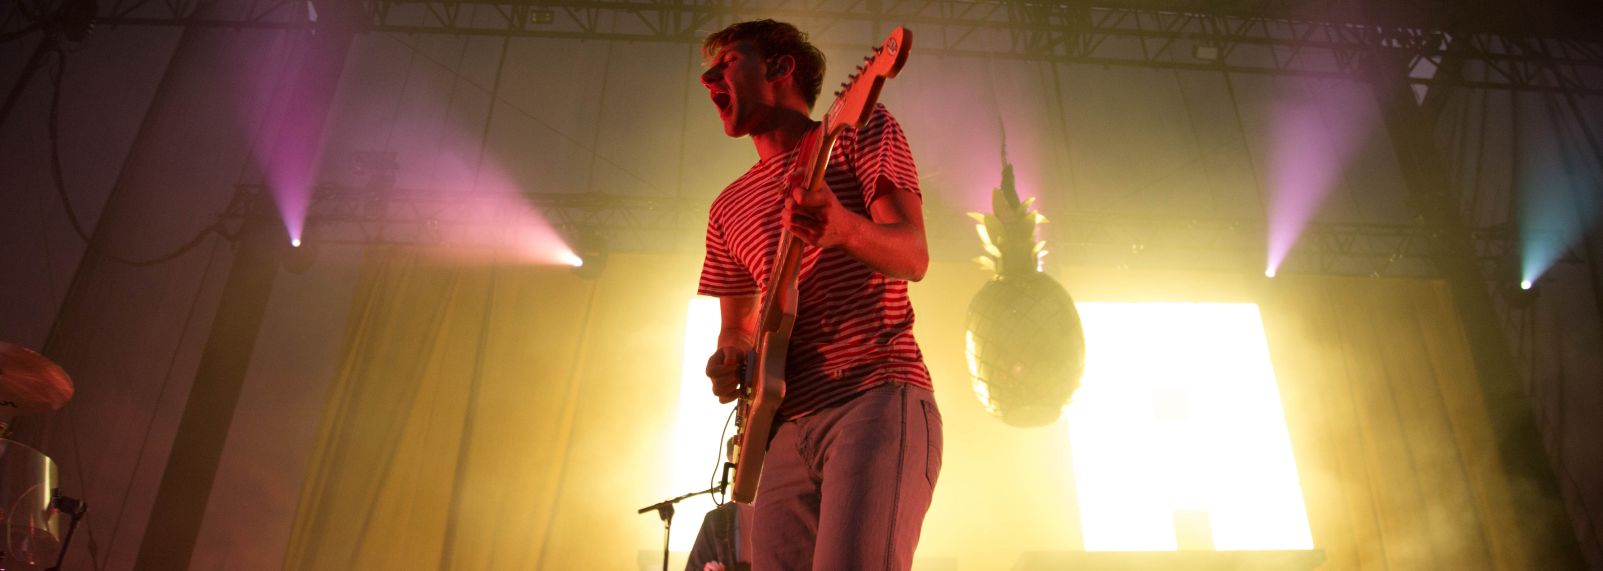 Glass Animals at Red Hat Amphitheater